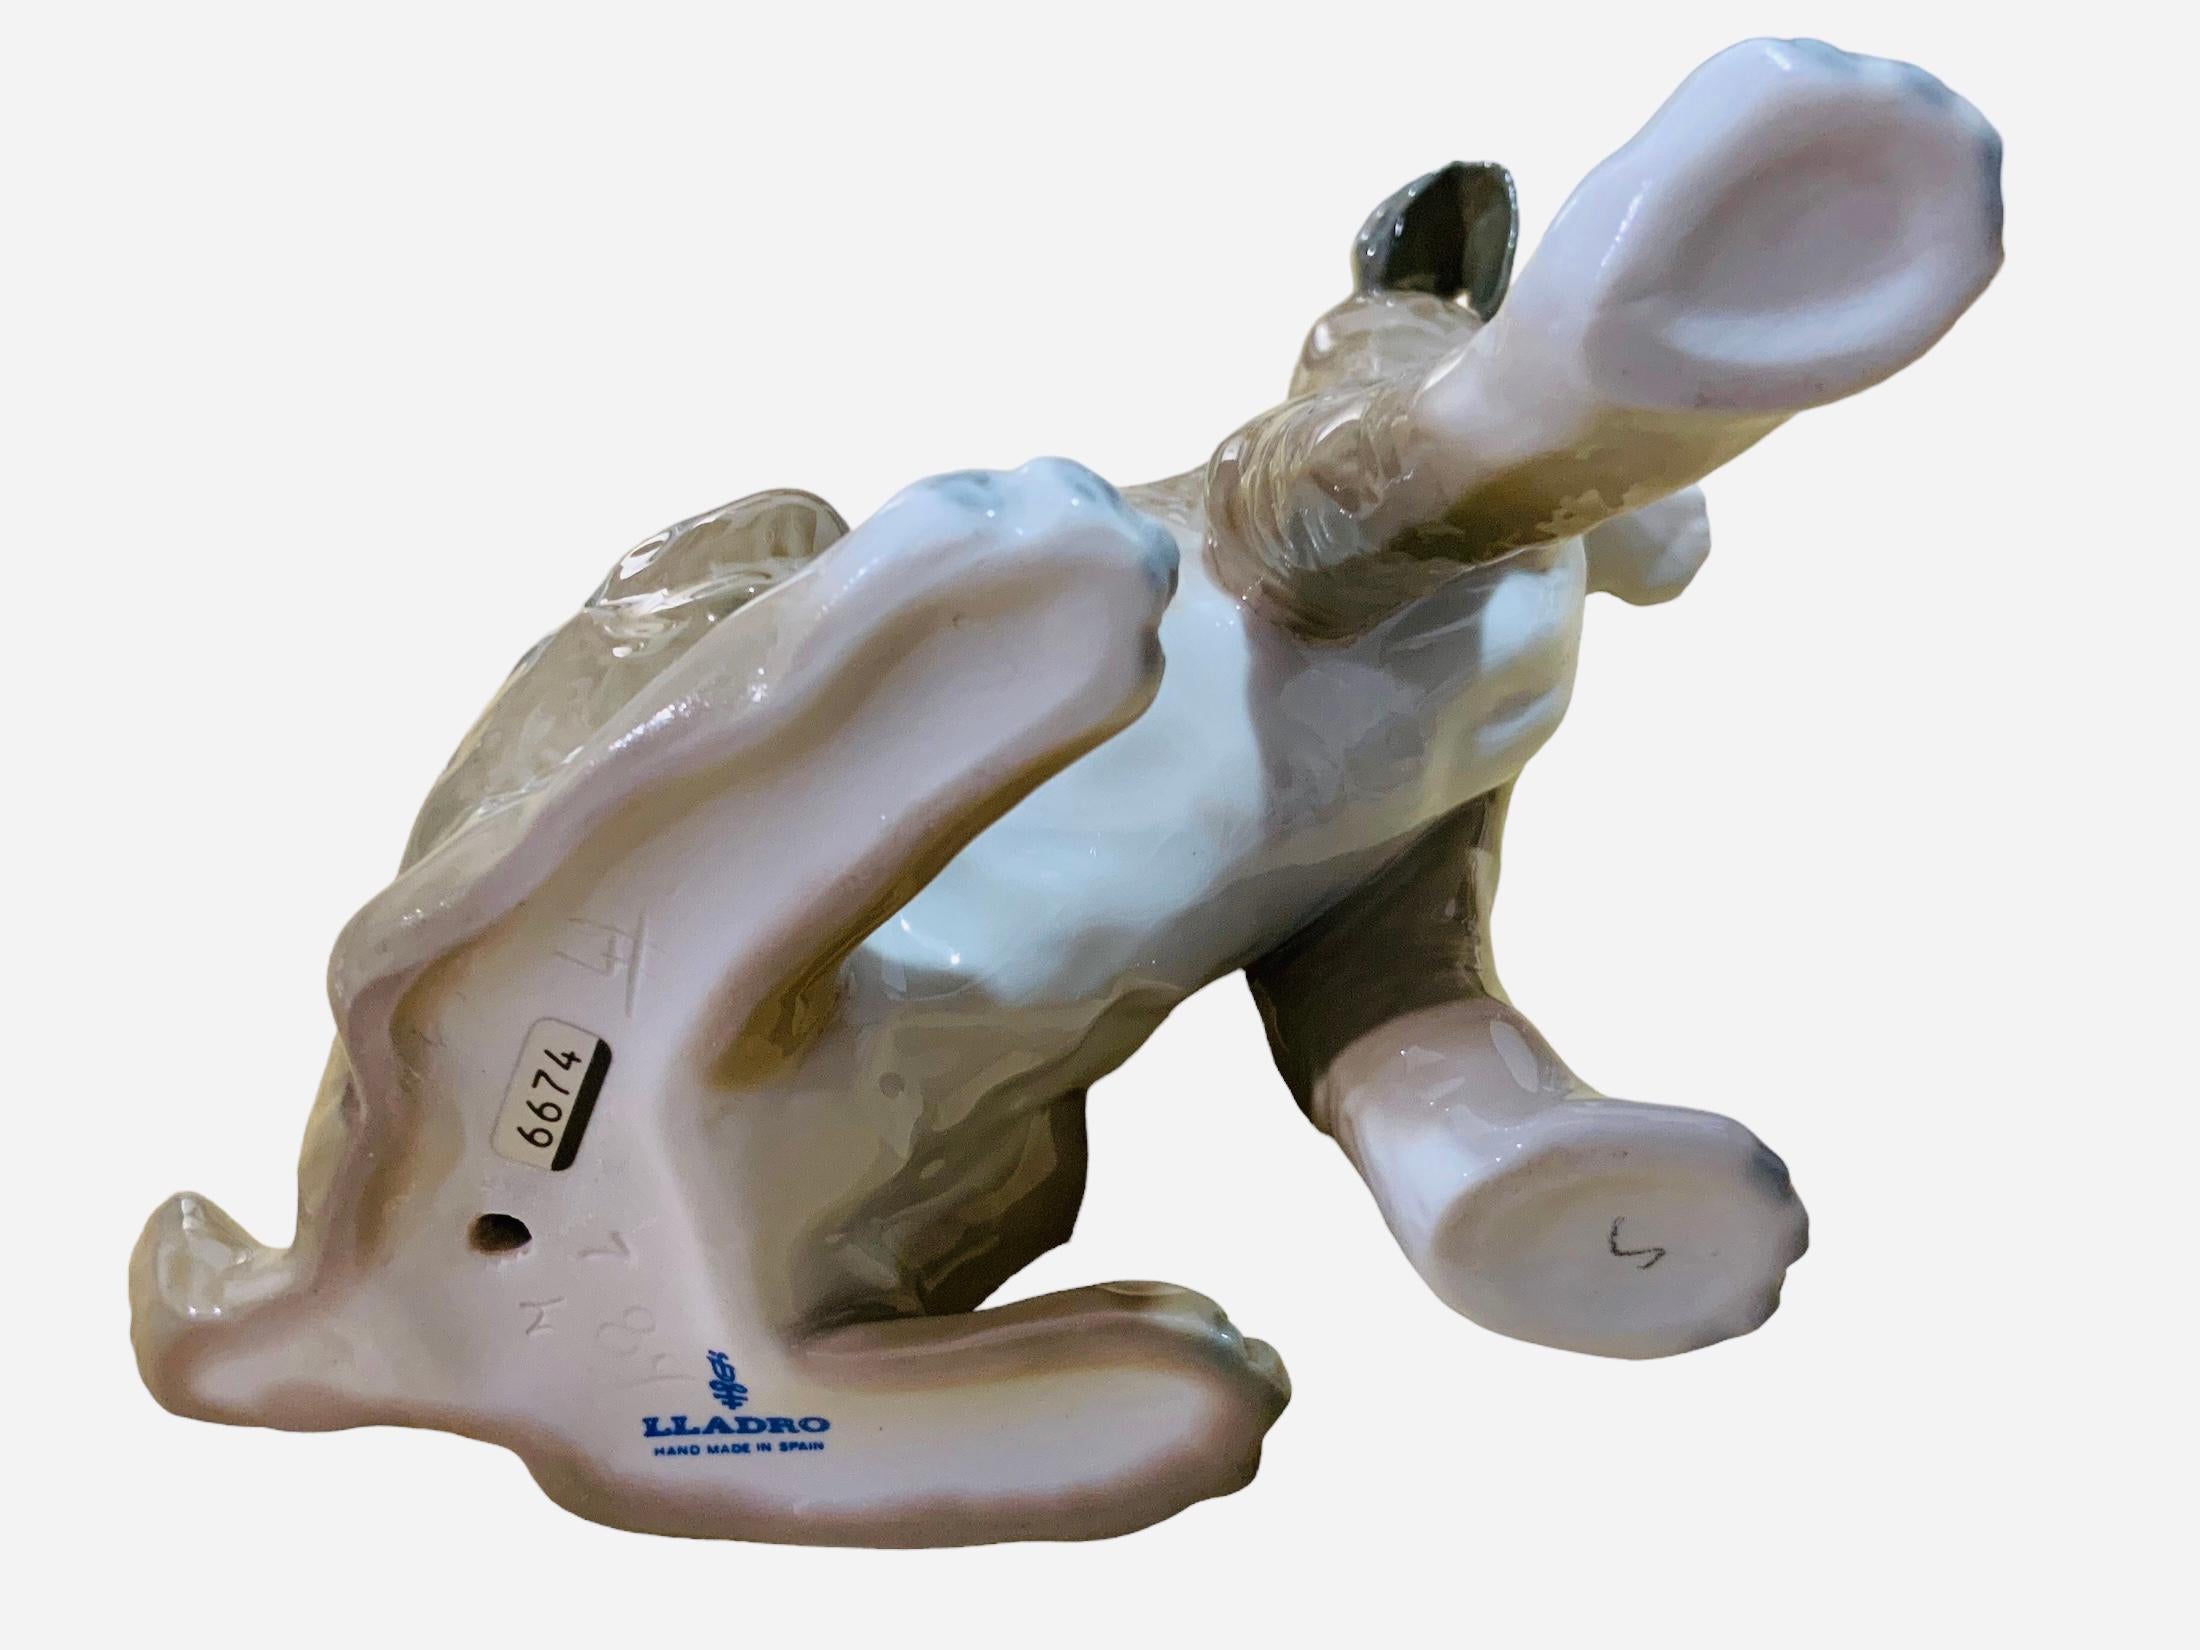 This is a Lladro porcelain figurine of a dog by Fulgencio Garcia. It depicts a hand painted full of details tall Setter standing up with a very expressive gaze. The Lladro hallmark  is below the figurine.